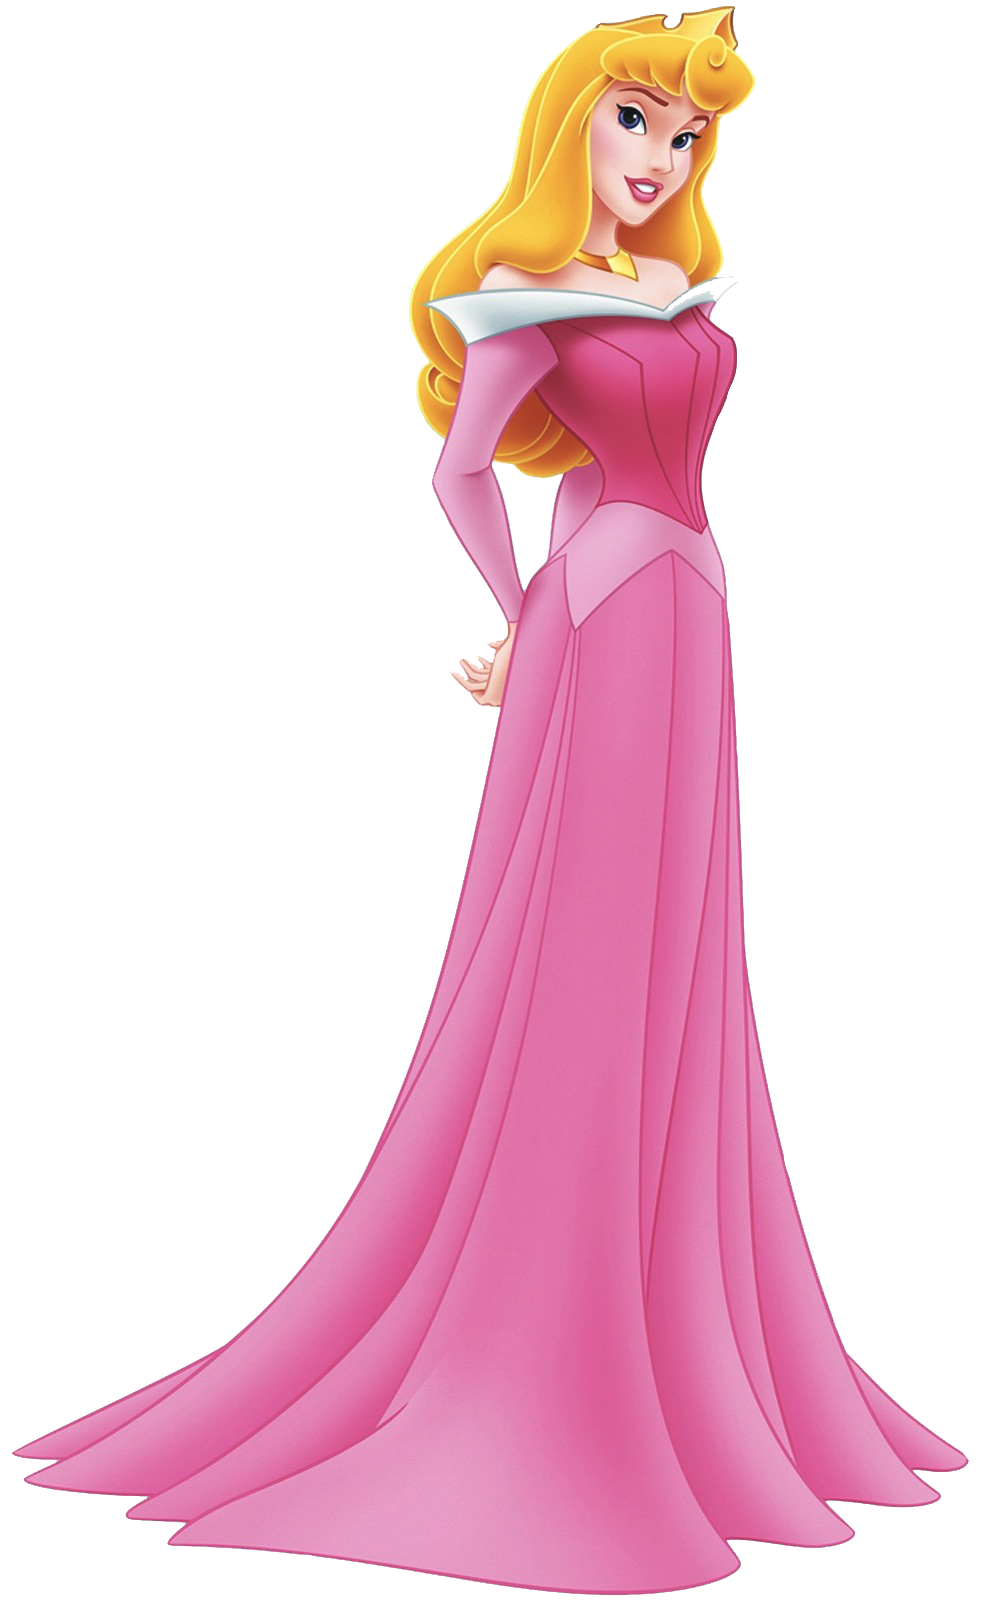 Sleeping Beauty PNG HD and HQ Image pngteam.com